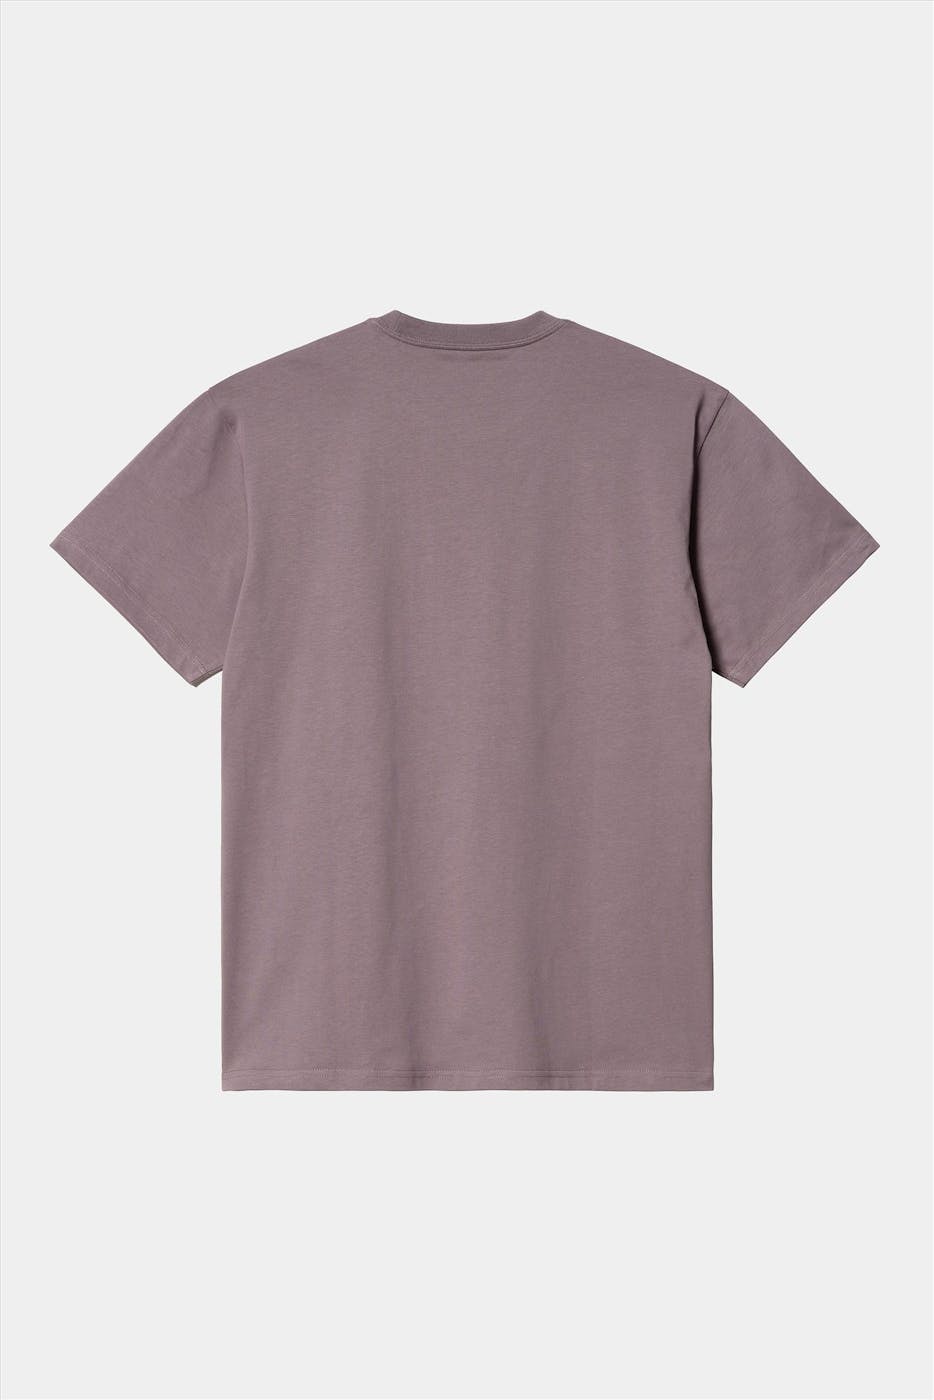 Carhartt WIP - Paarse Chase T-shirt